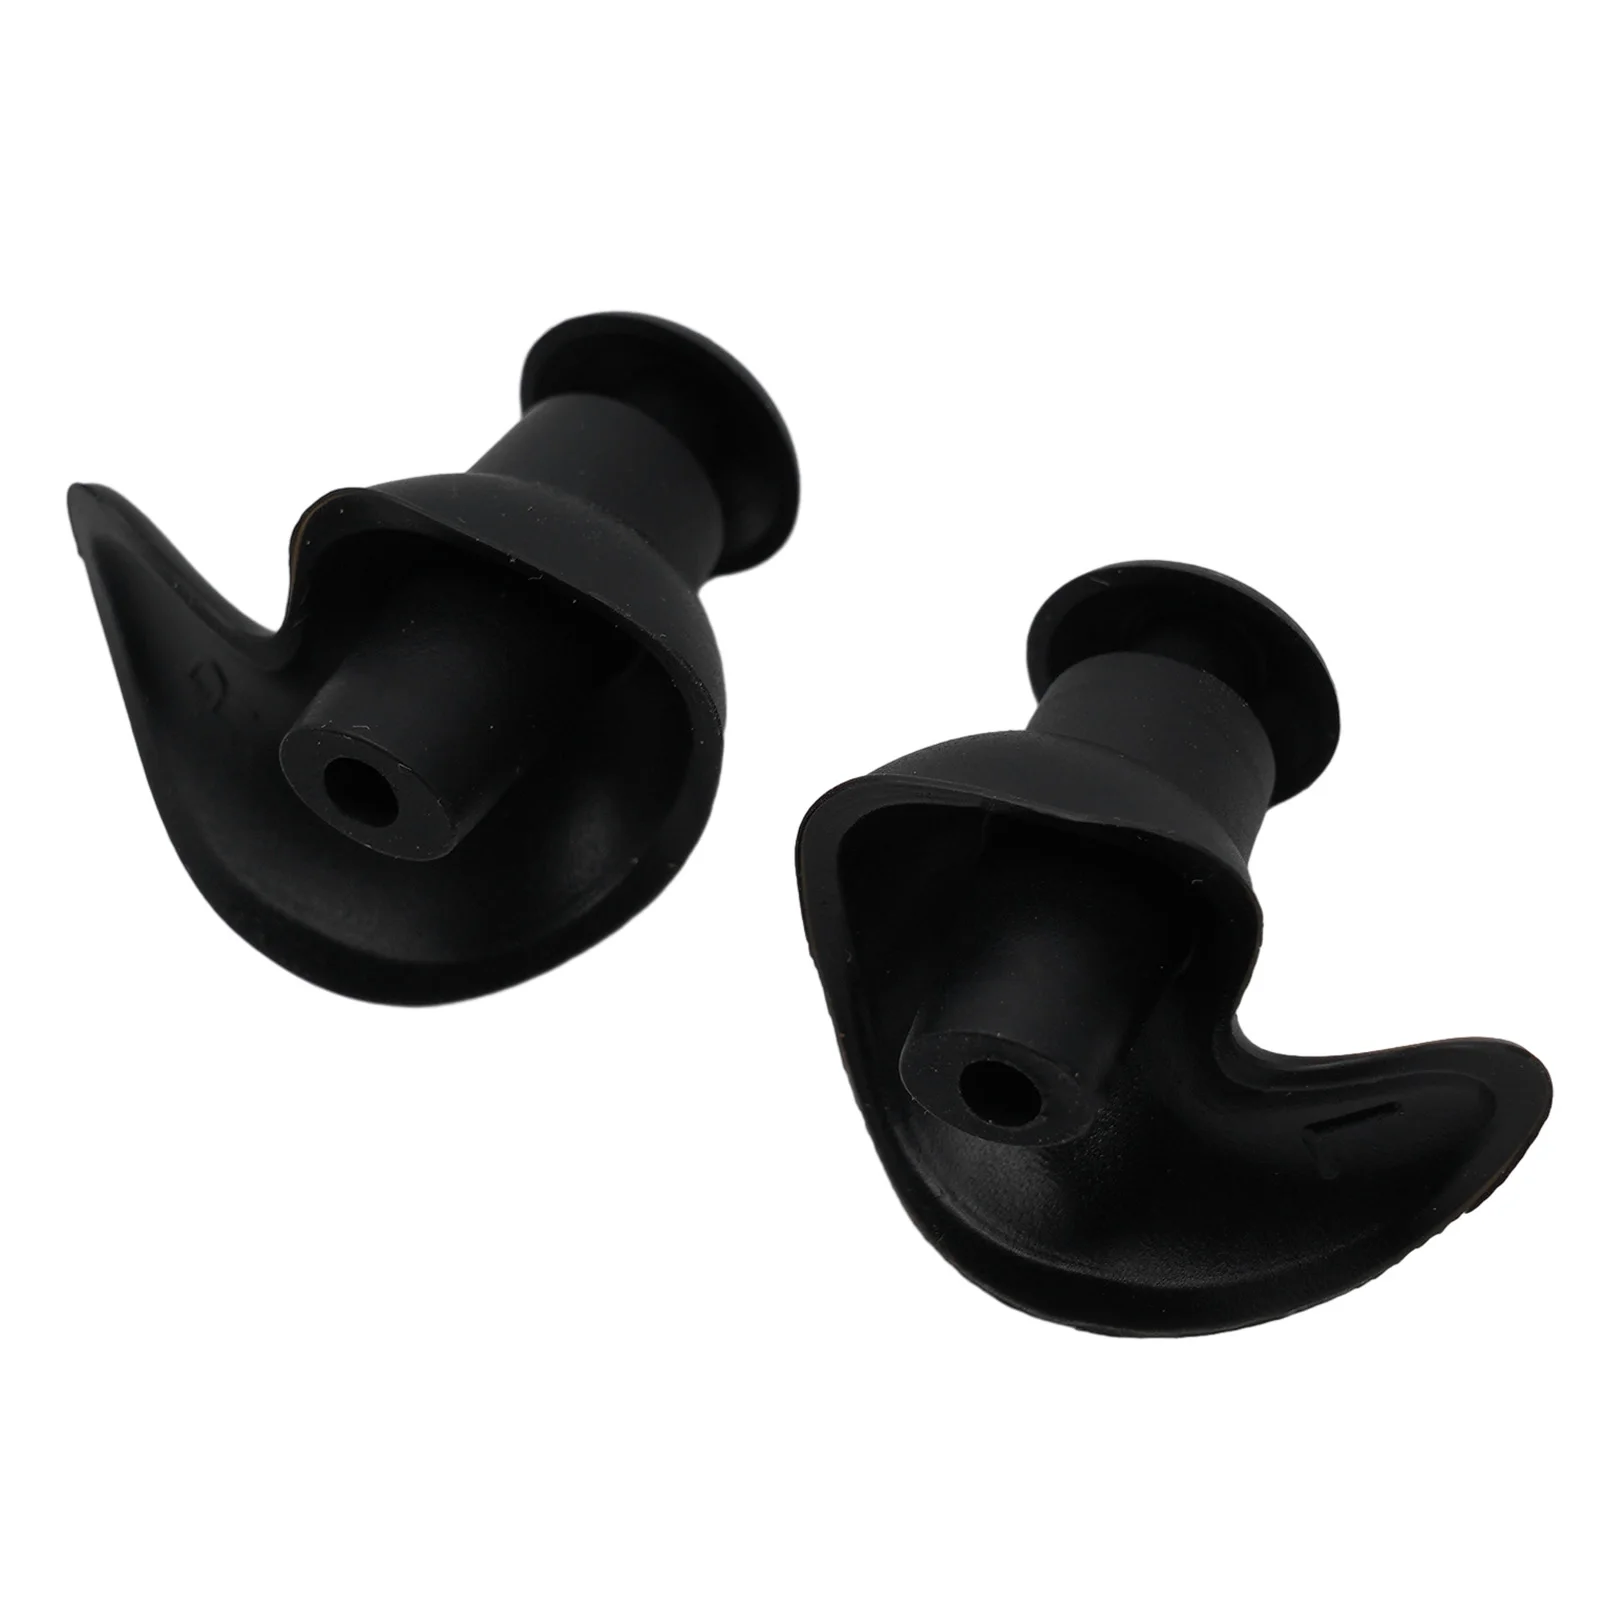 

1 Pair Soft Swimming Earplugs Prevent Water Protection Ear Plug Spiral Waterproof Silicone Swim Dive Supplies 3D Soundproof